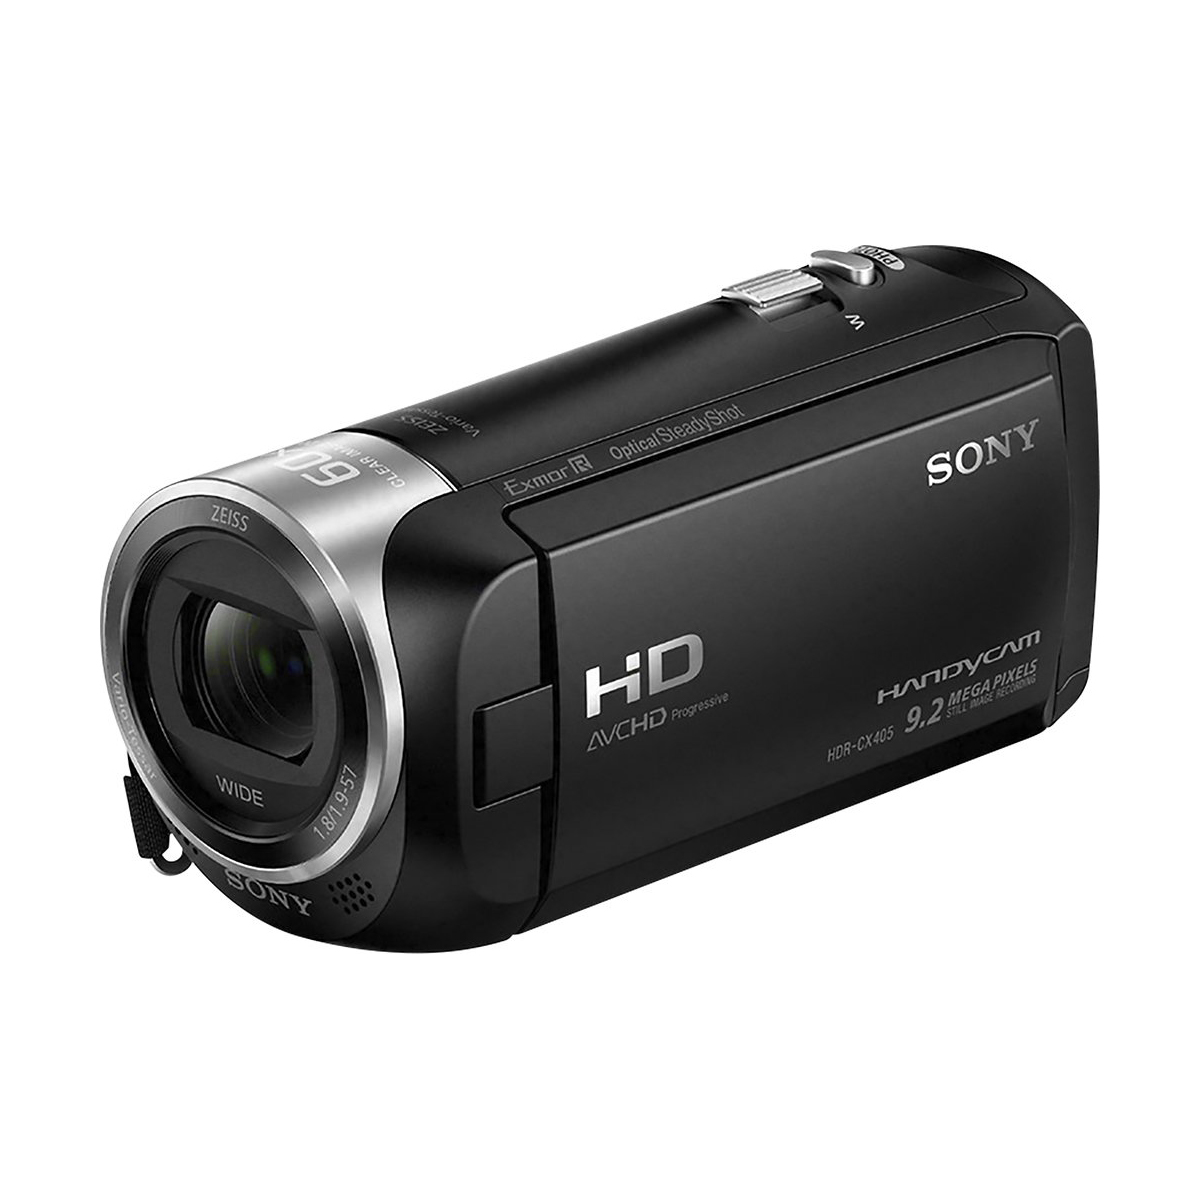 Sony HDR-CX405 camcorder